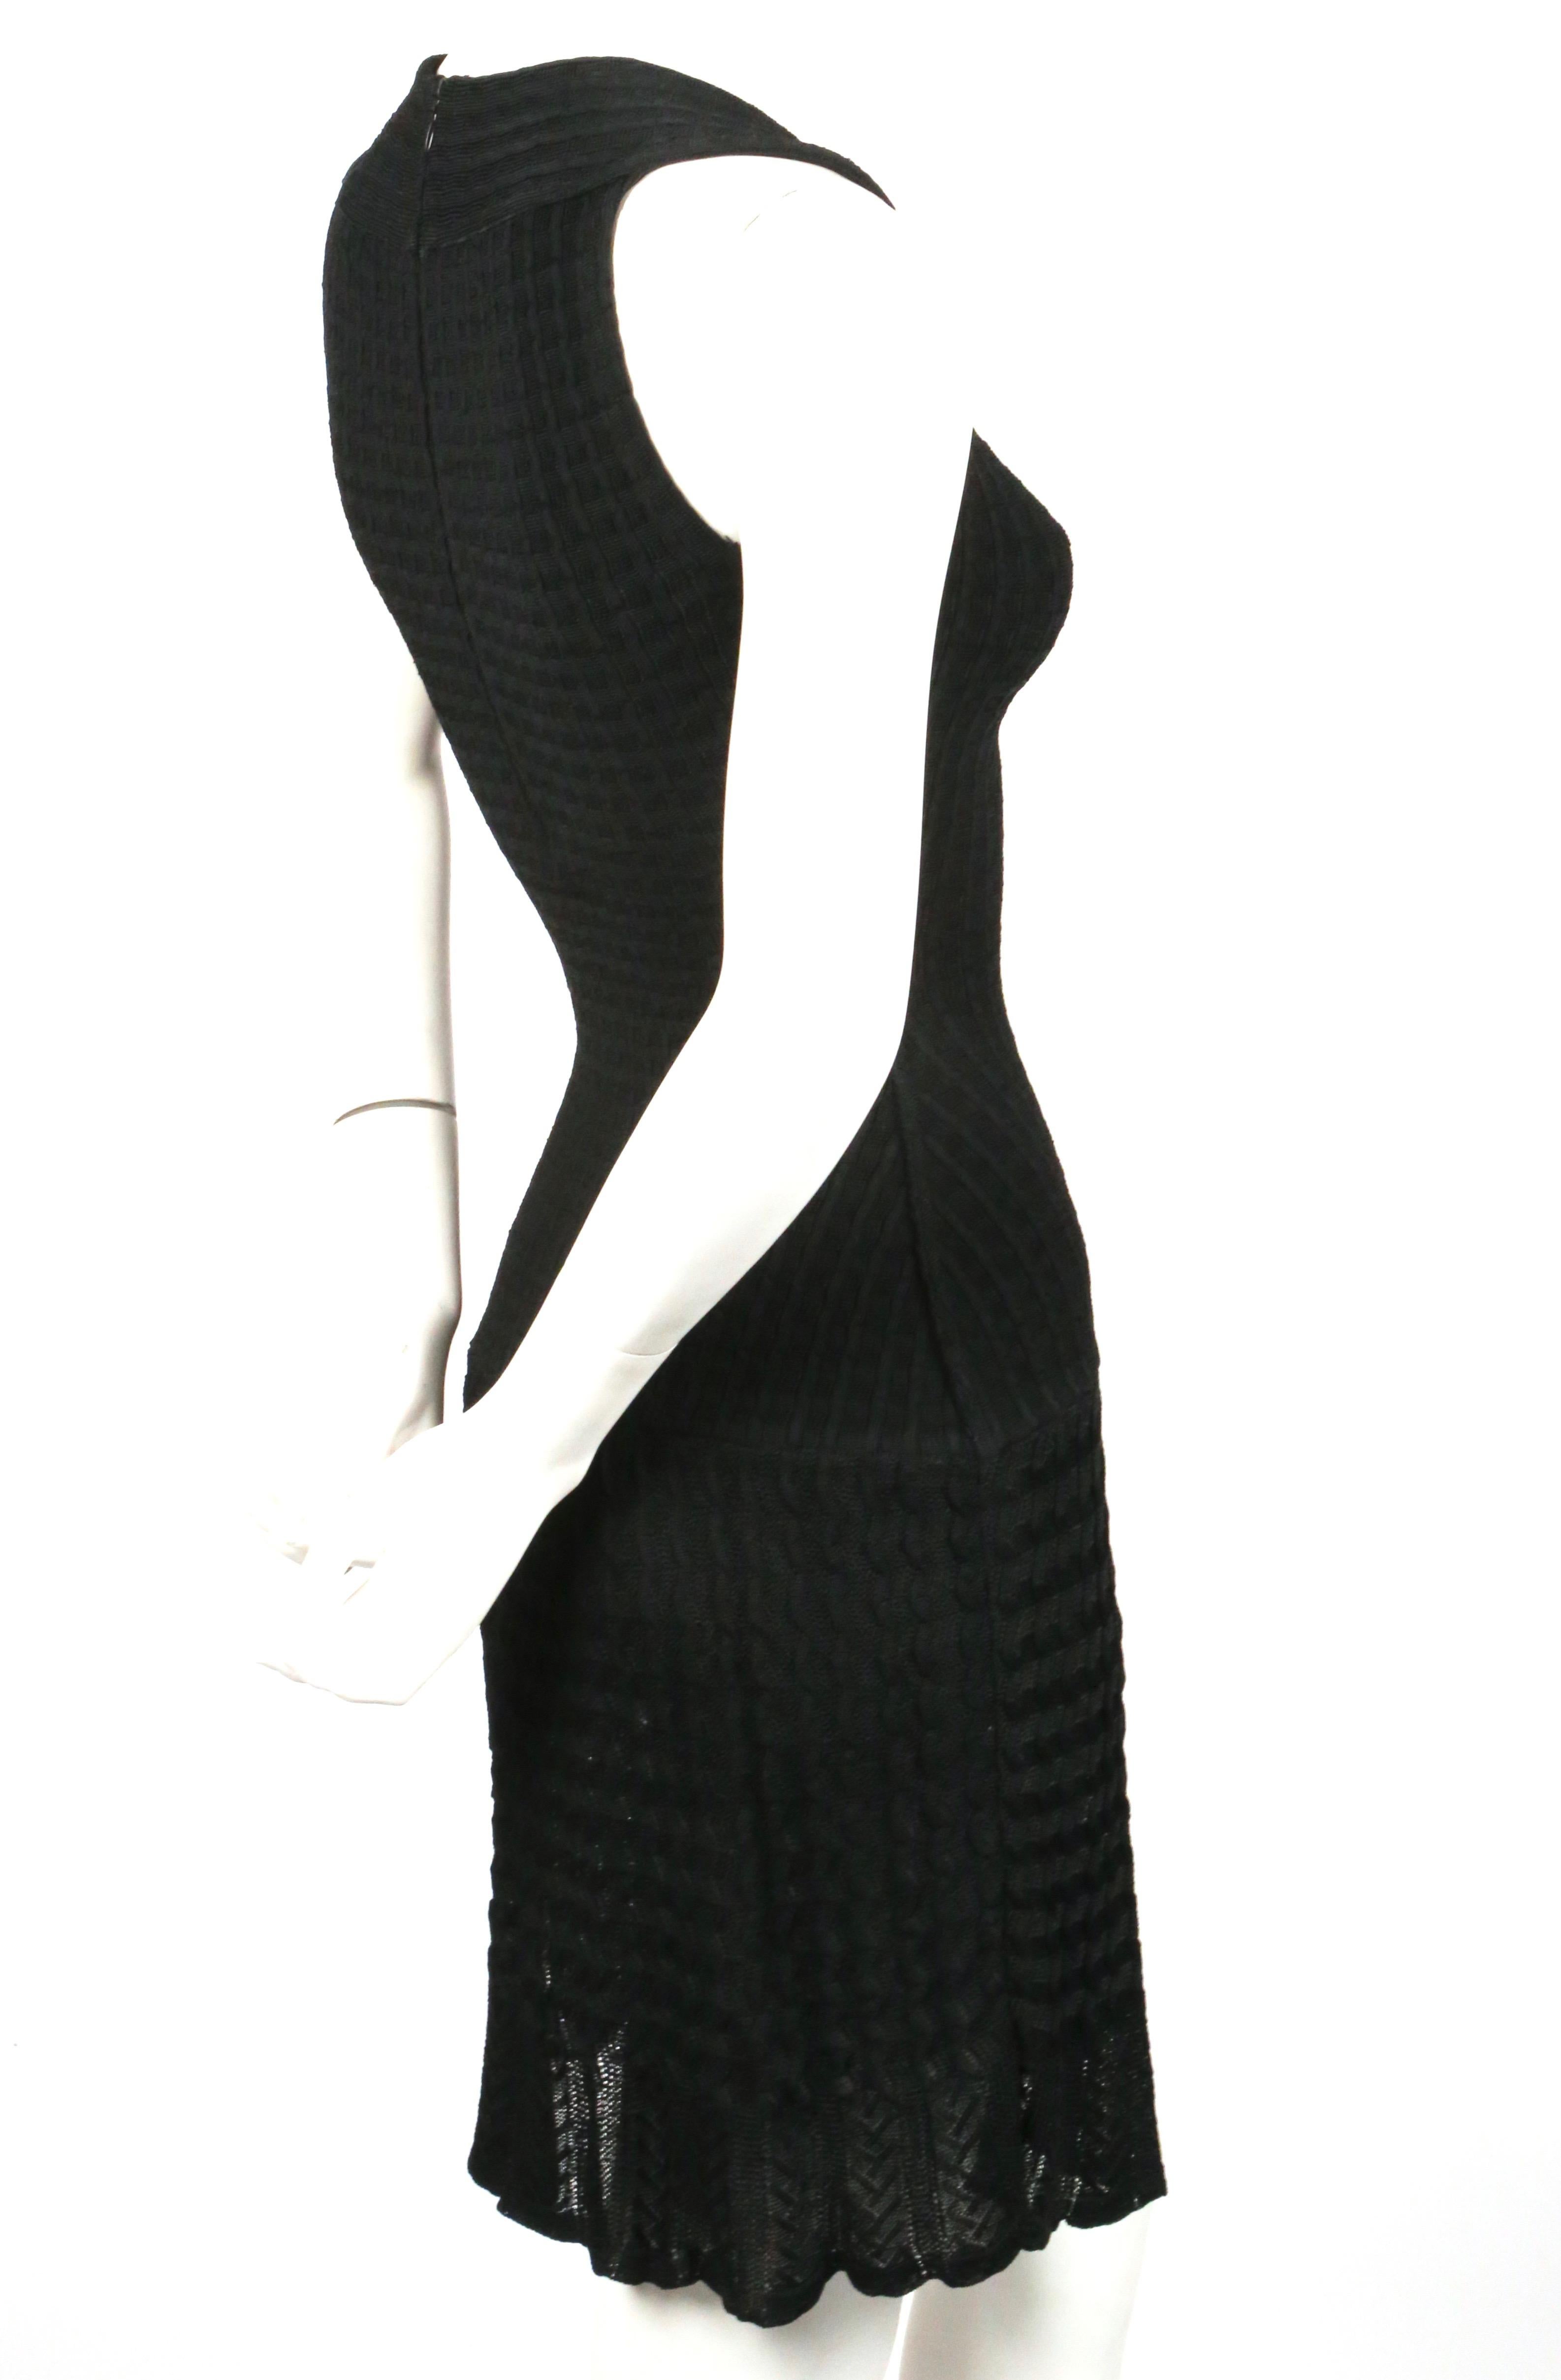 Jet black knit wool dress with semi sheer crochet detail designed by Azzedine Alaia dating to the 1990's. Labeled a size XS. Measures approximately (unstretched): 24